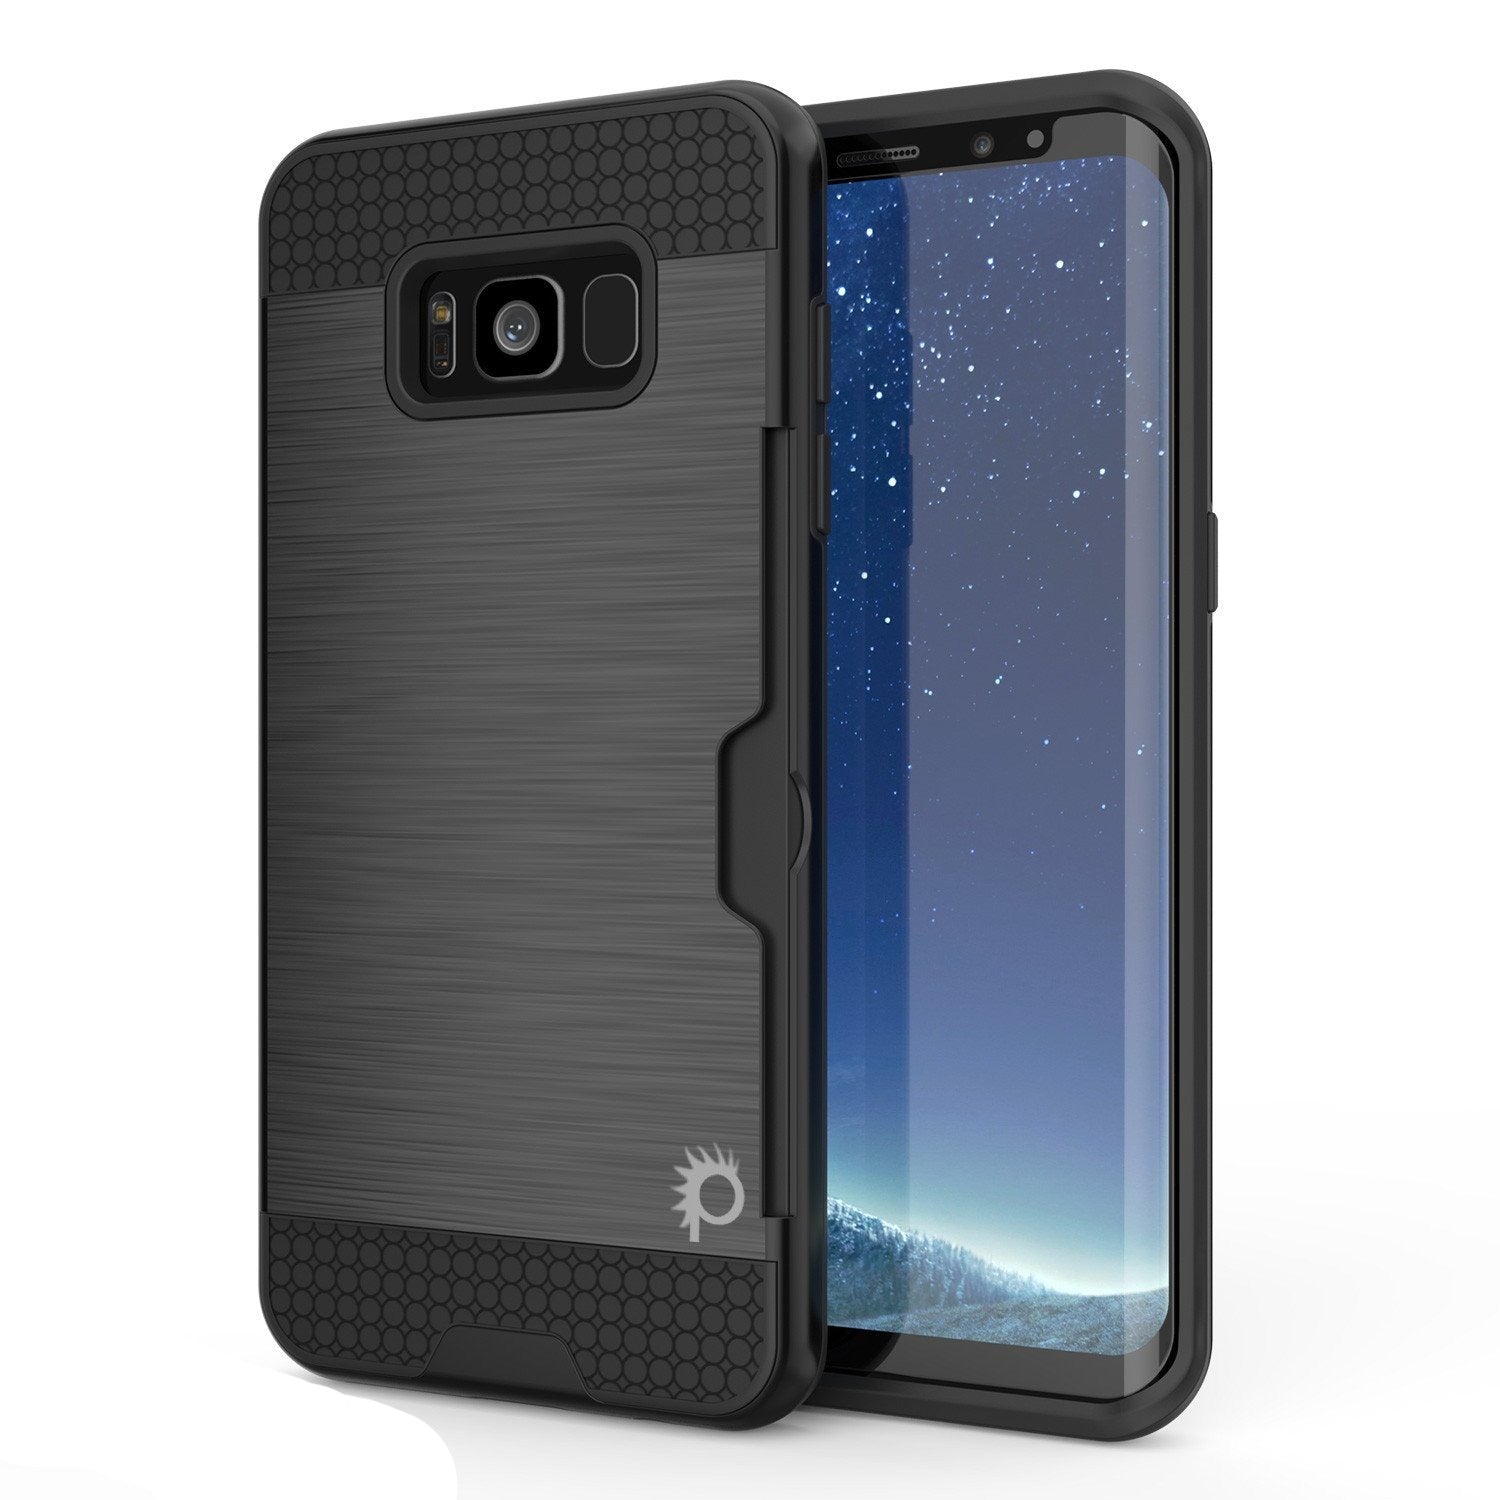 Galaxy S8 Plus Case, PUNKcase [SLOT Series] [Slim Fit] Dual-Layer Armor Cover w/Integrated Anti-Shock System, Credit Card Slot & PunkShield Screen Protector for Samsung Galaxy S8+ [Black]